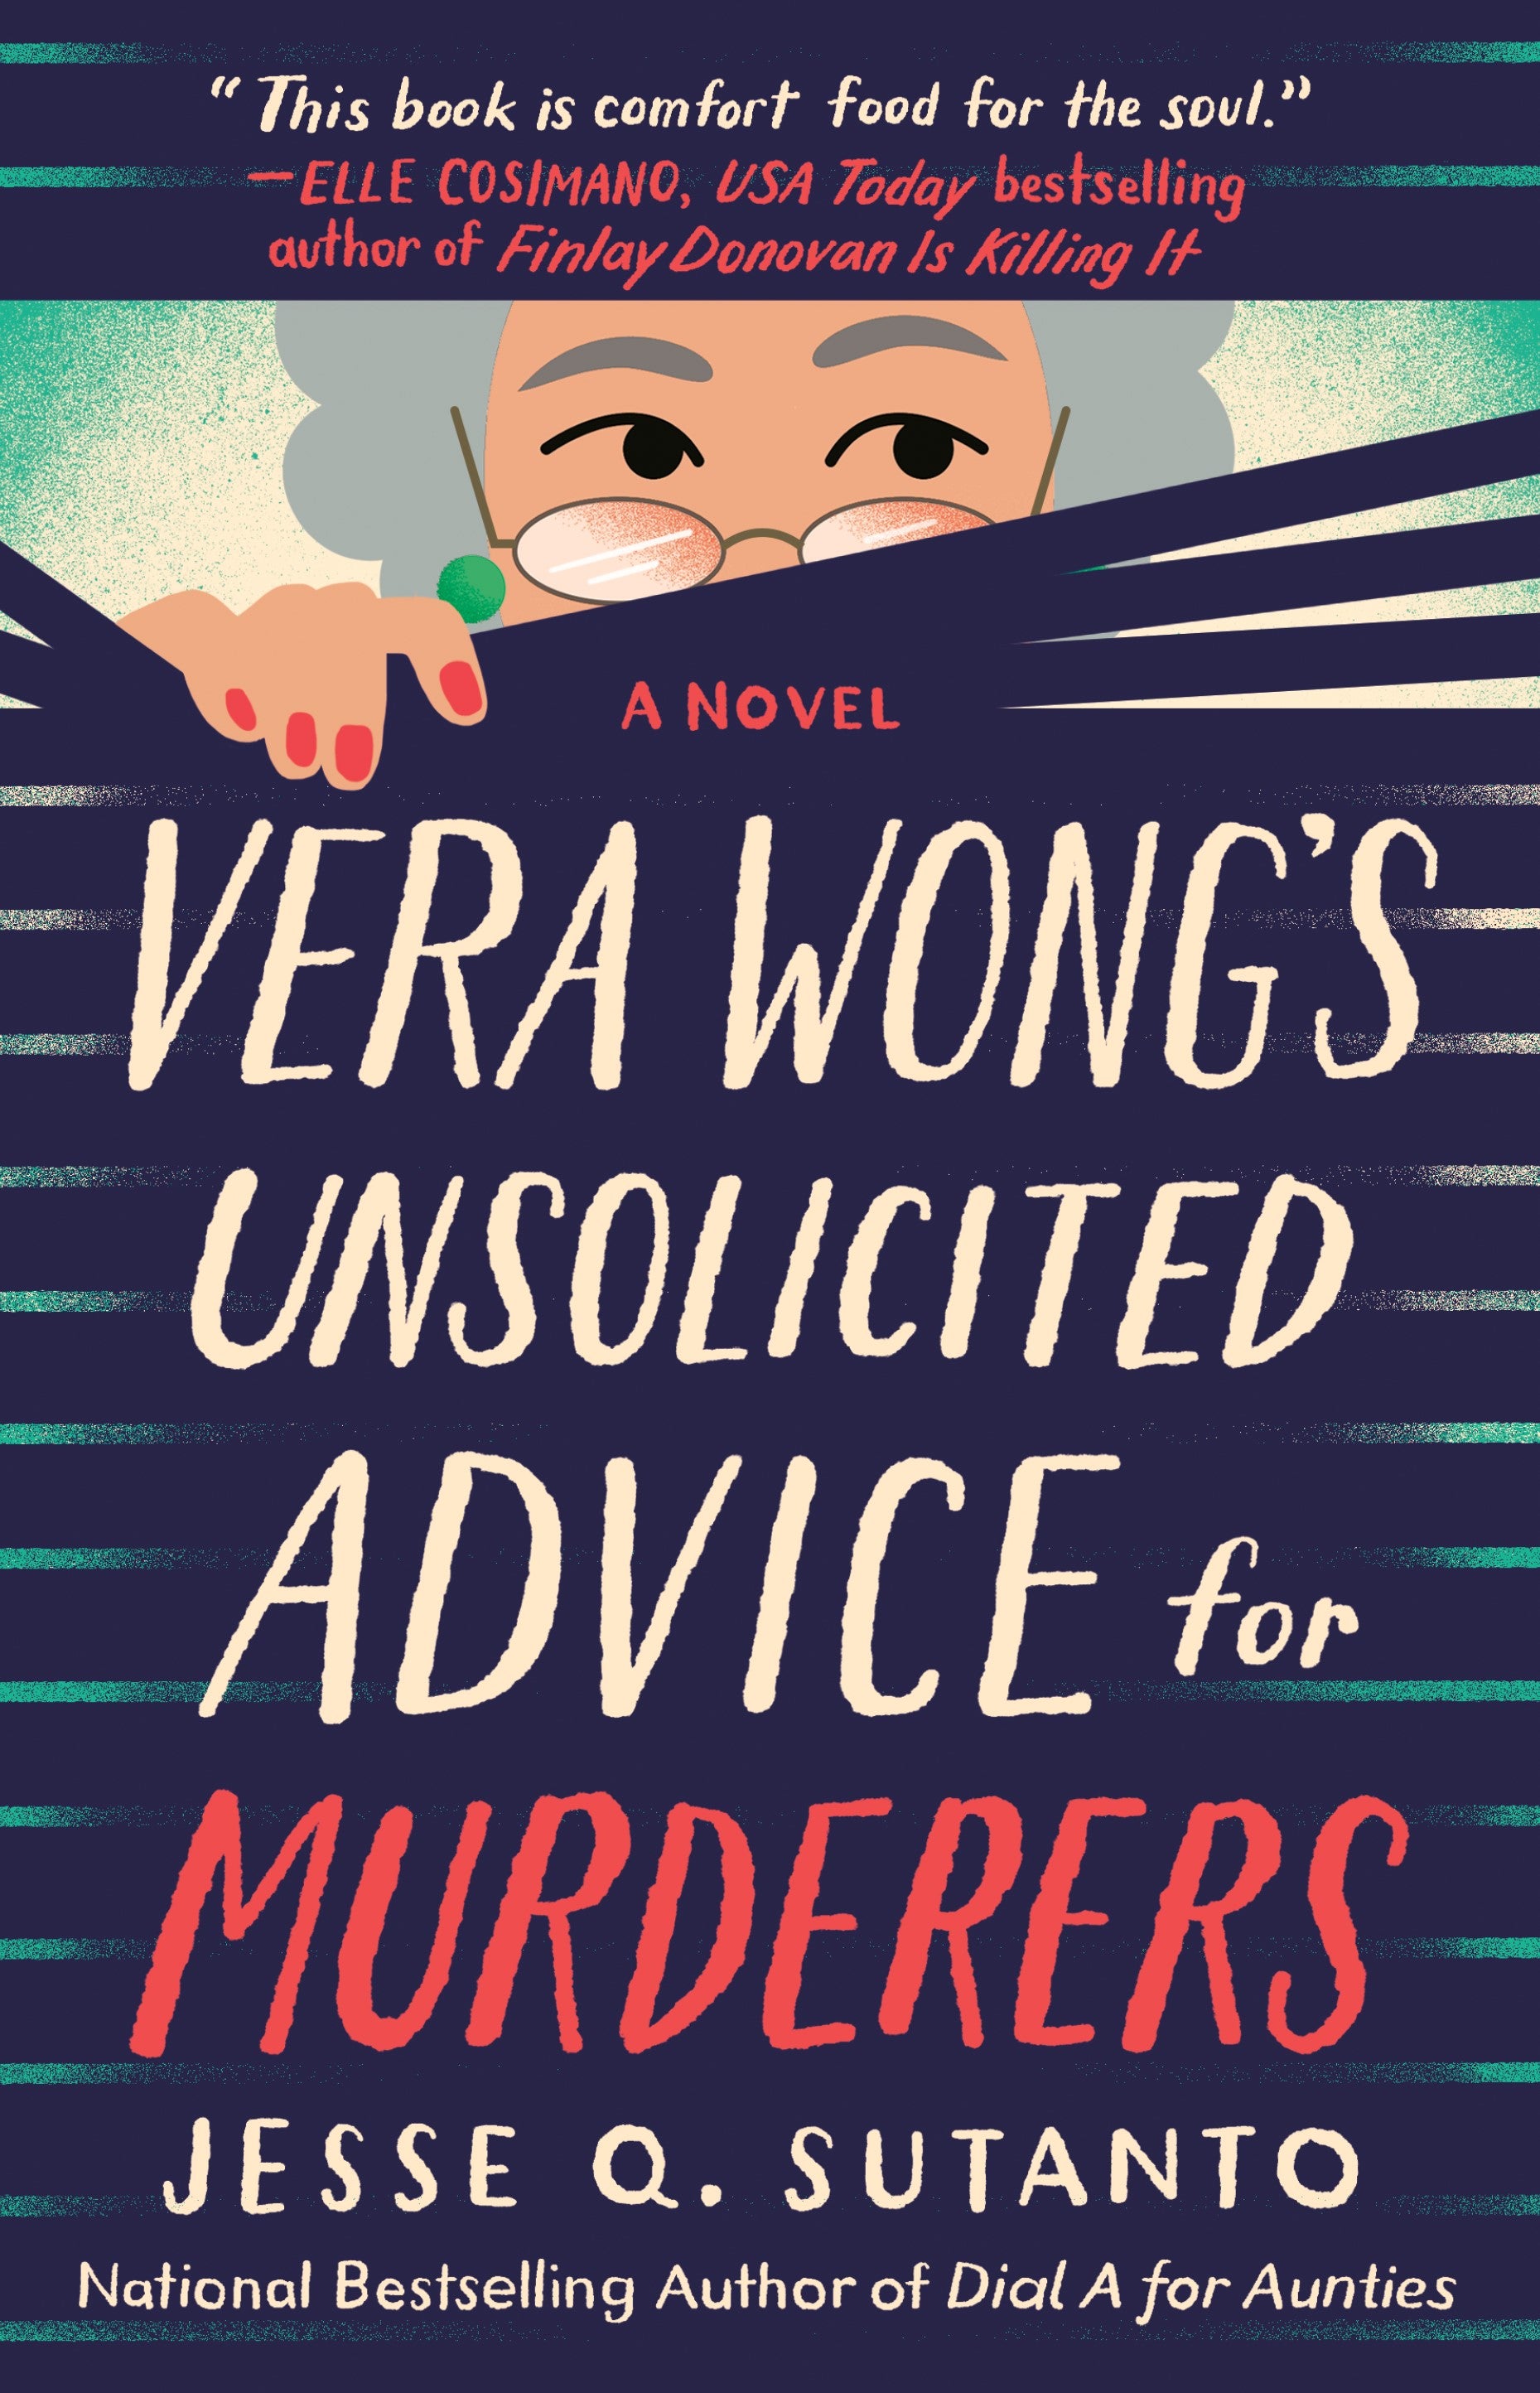 Cover of "Vera Wong's Unsolicited Advice for Murderers" by Jesse Q. Sutanto